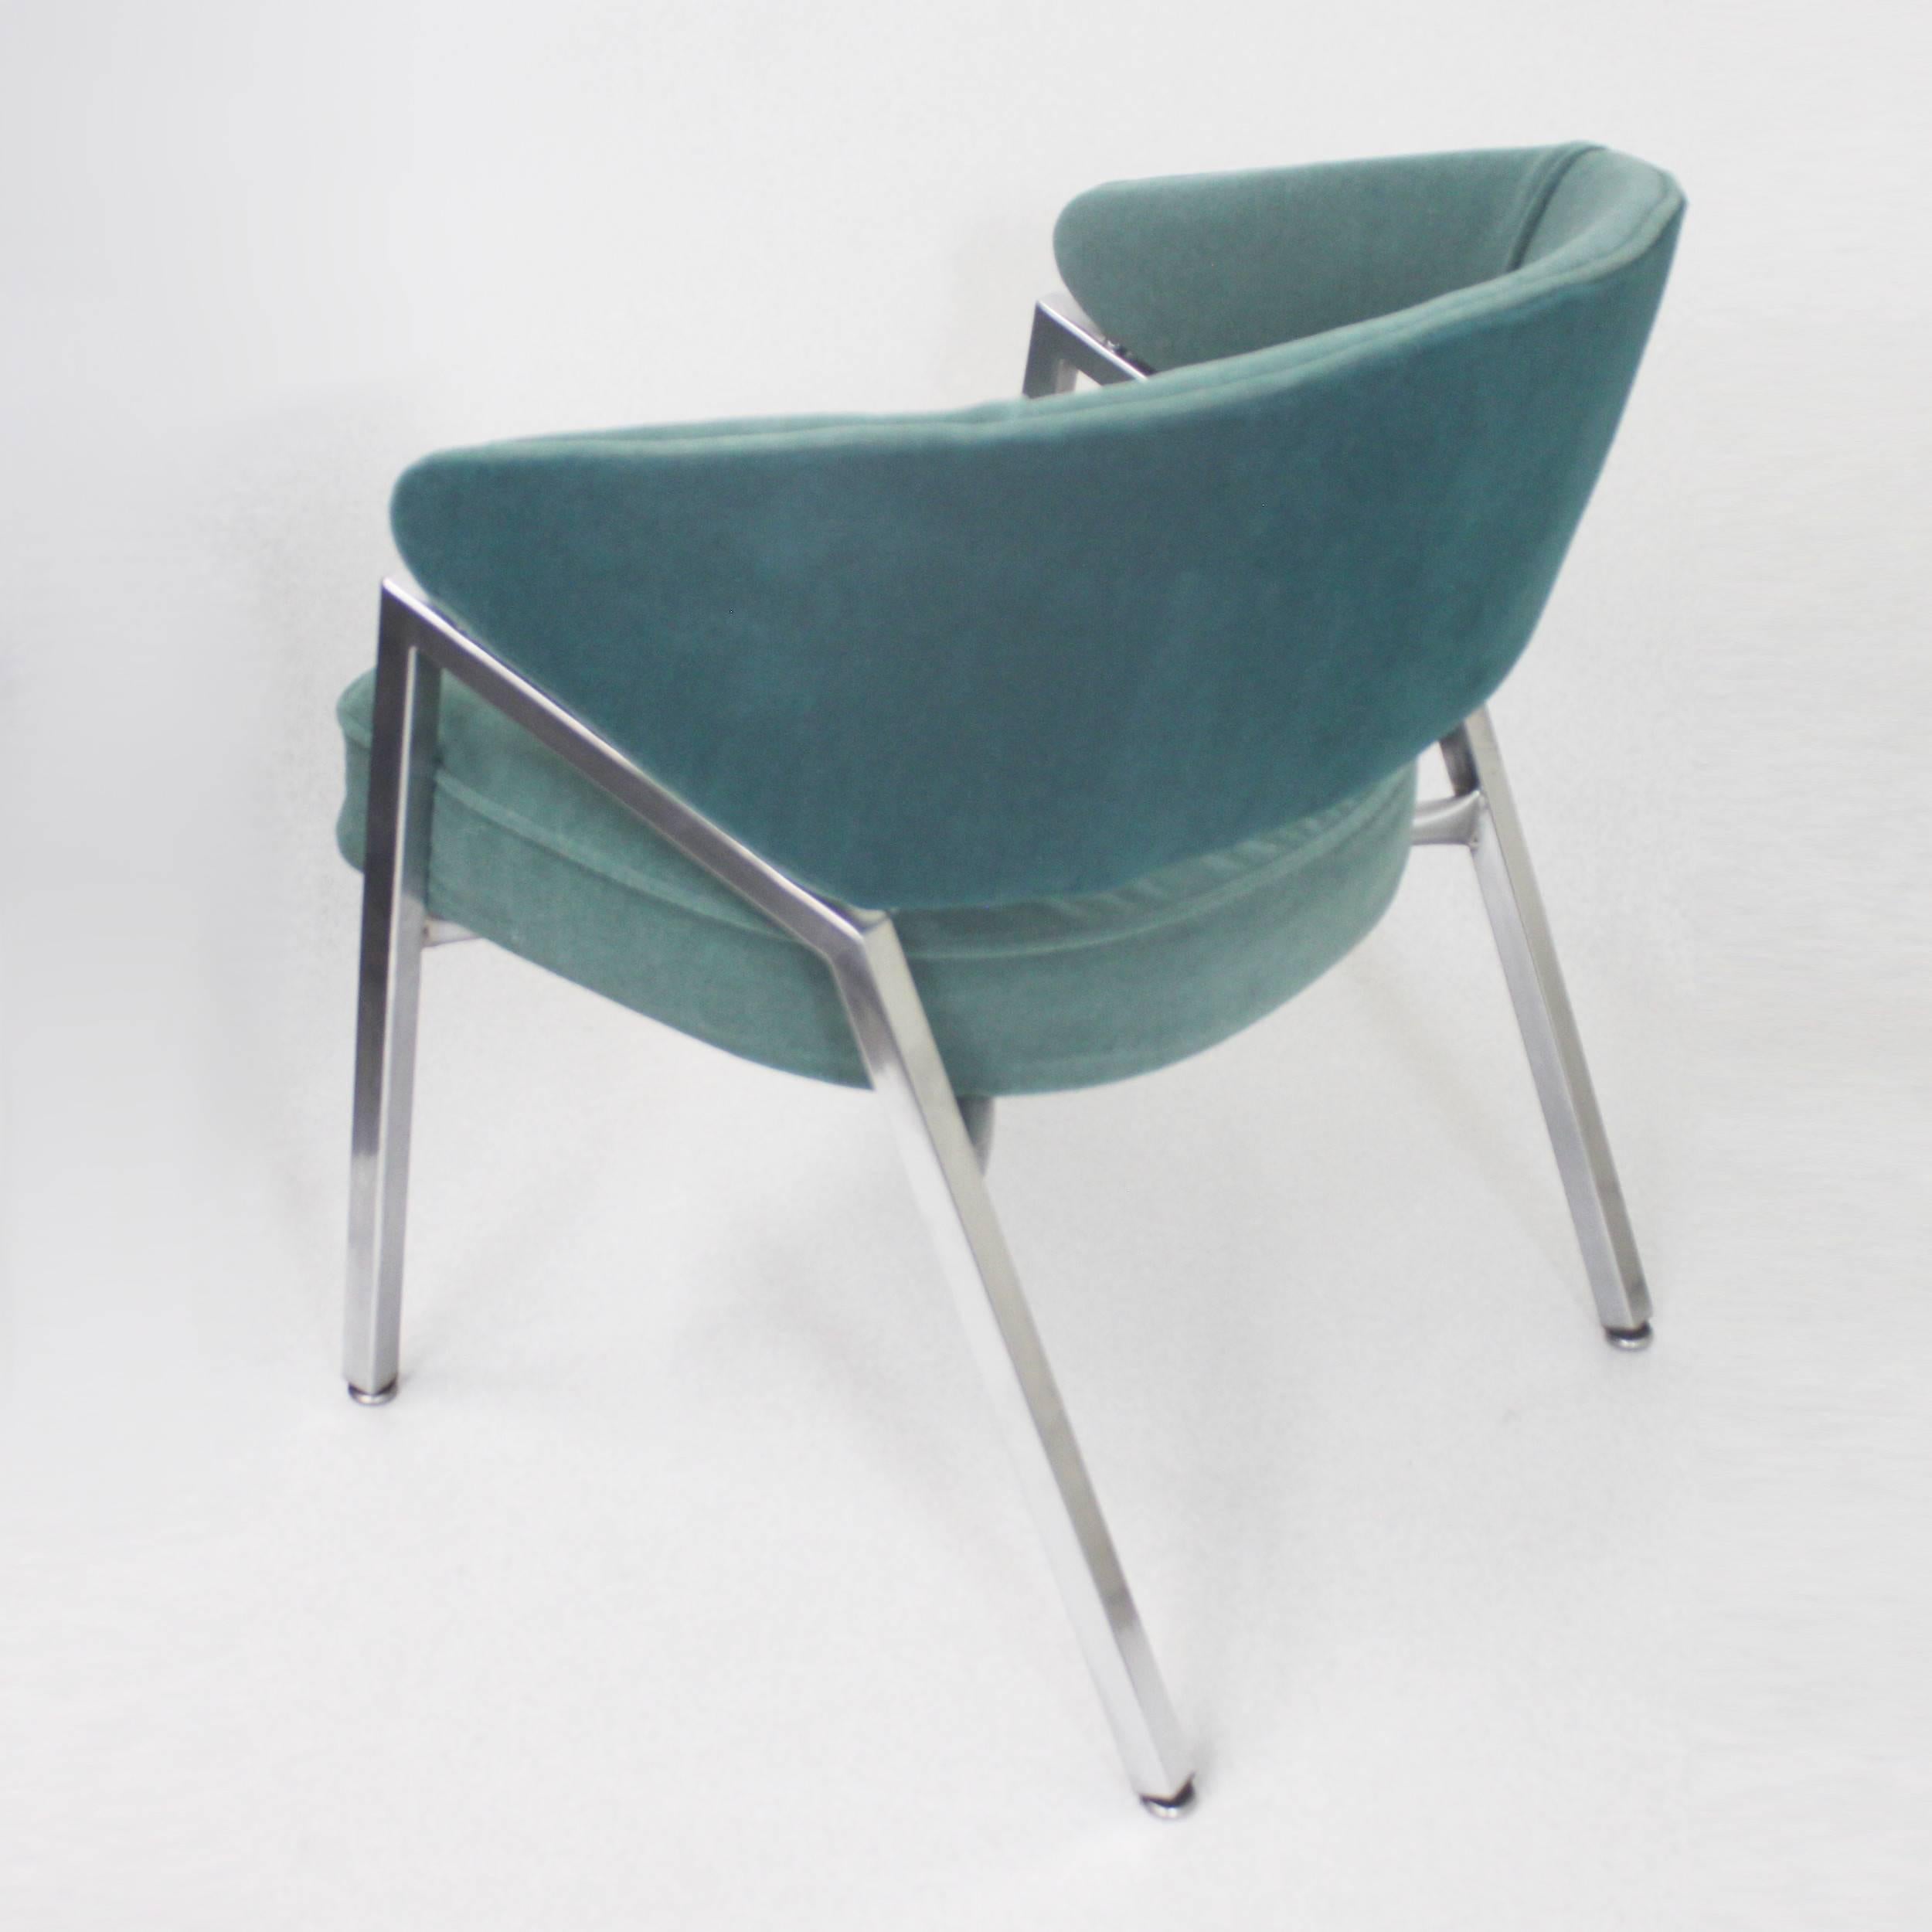 Rare Pair of 1970s Mid-Century Modern Teal Green and Chrome Side Armchairs 2